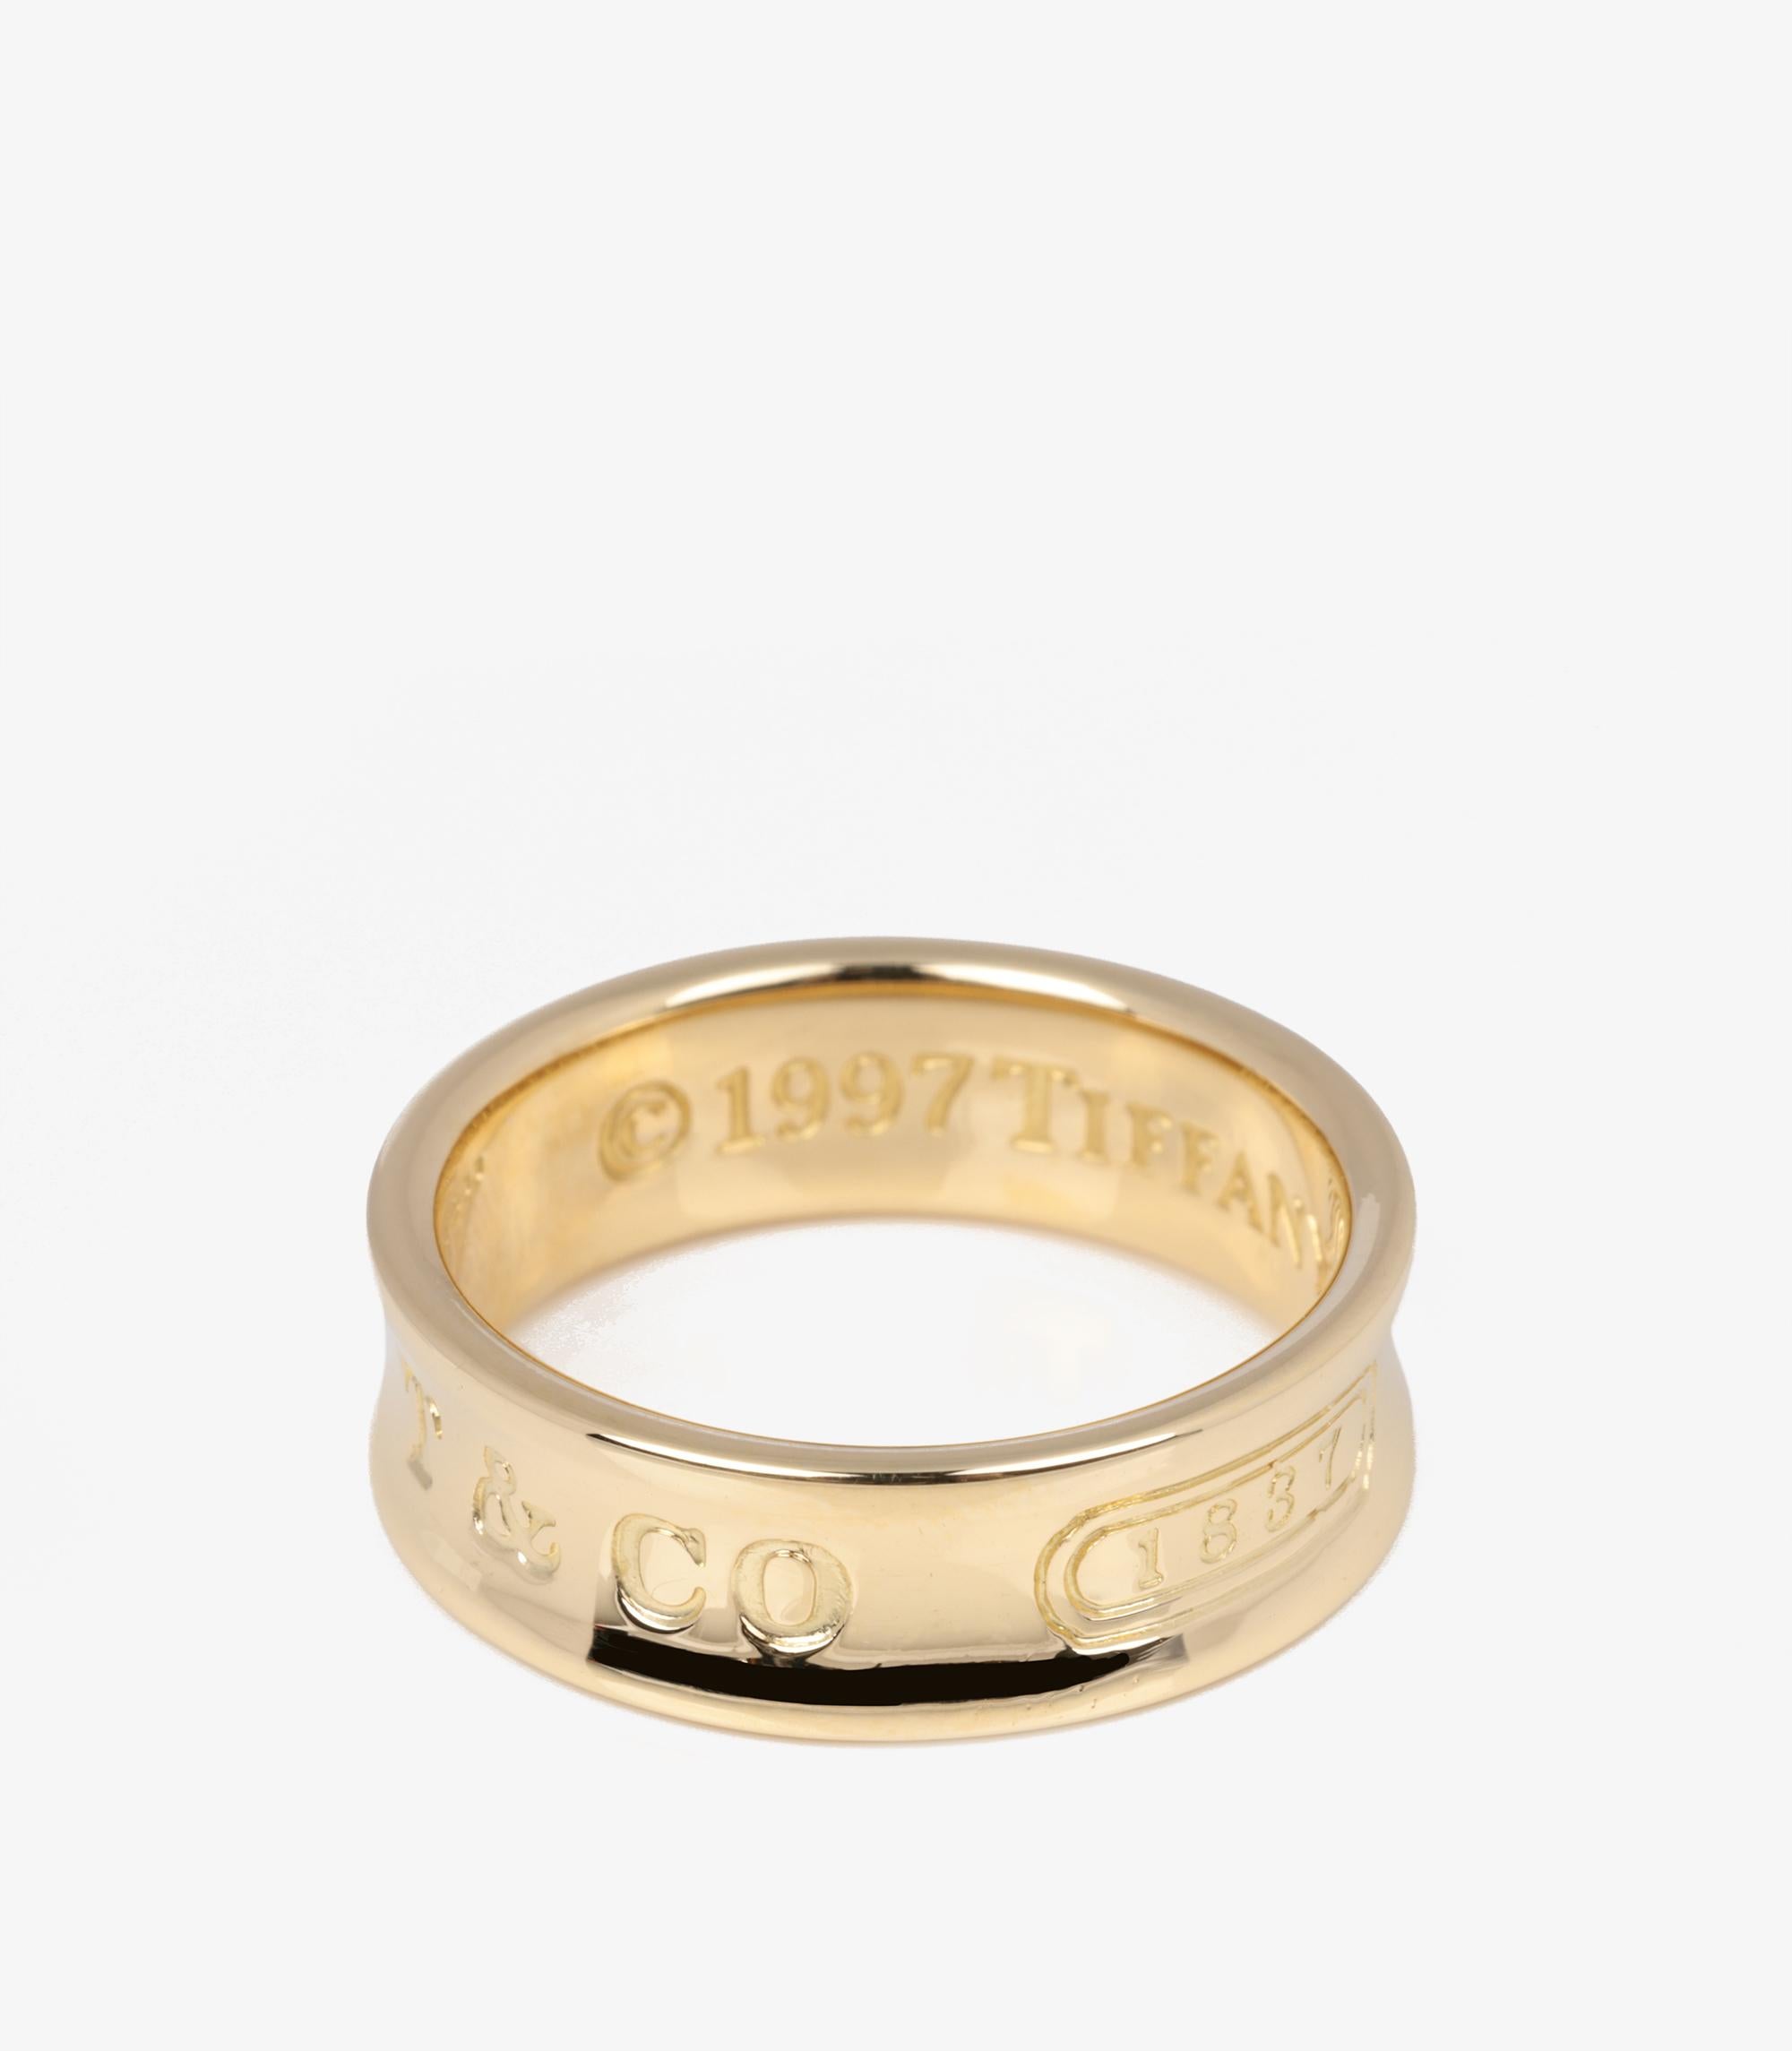 Tiffany & Co. 18ct Yellow Gold 1837 Band Ring

Brand- Tiffany & Co.
Model- 1837 Band Ring
Product Type- Ring
Material(s)- 18ct Yellow Gold
UK Ring Size- L 1/2
EU Ring Size- 52
US Ring Size- 6
Resizing Possible- No

Band Width- 6mm
Total Weight-